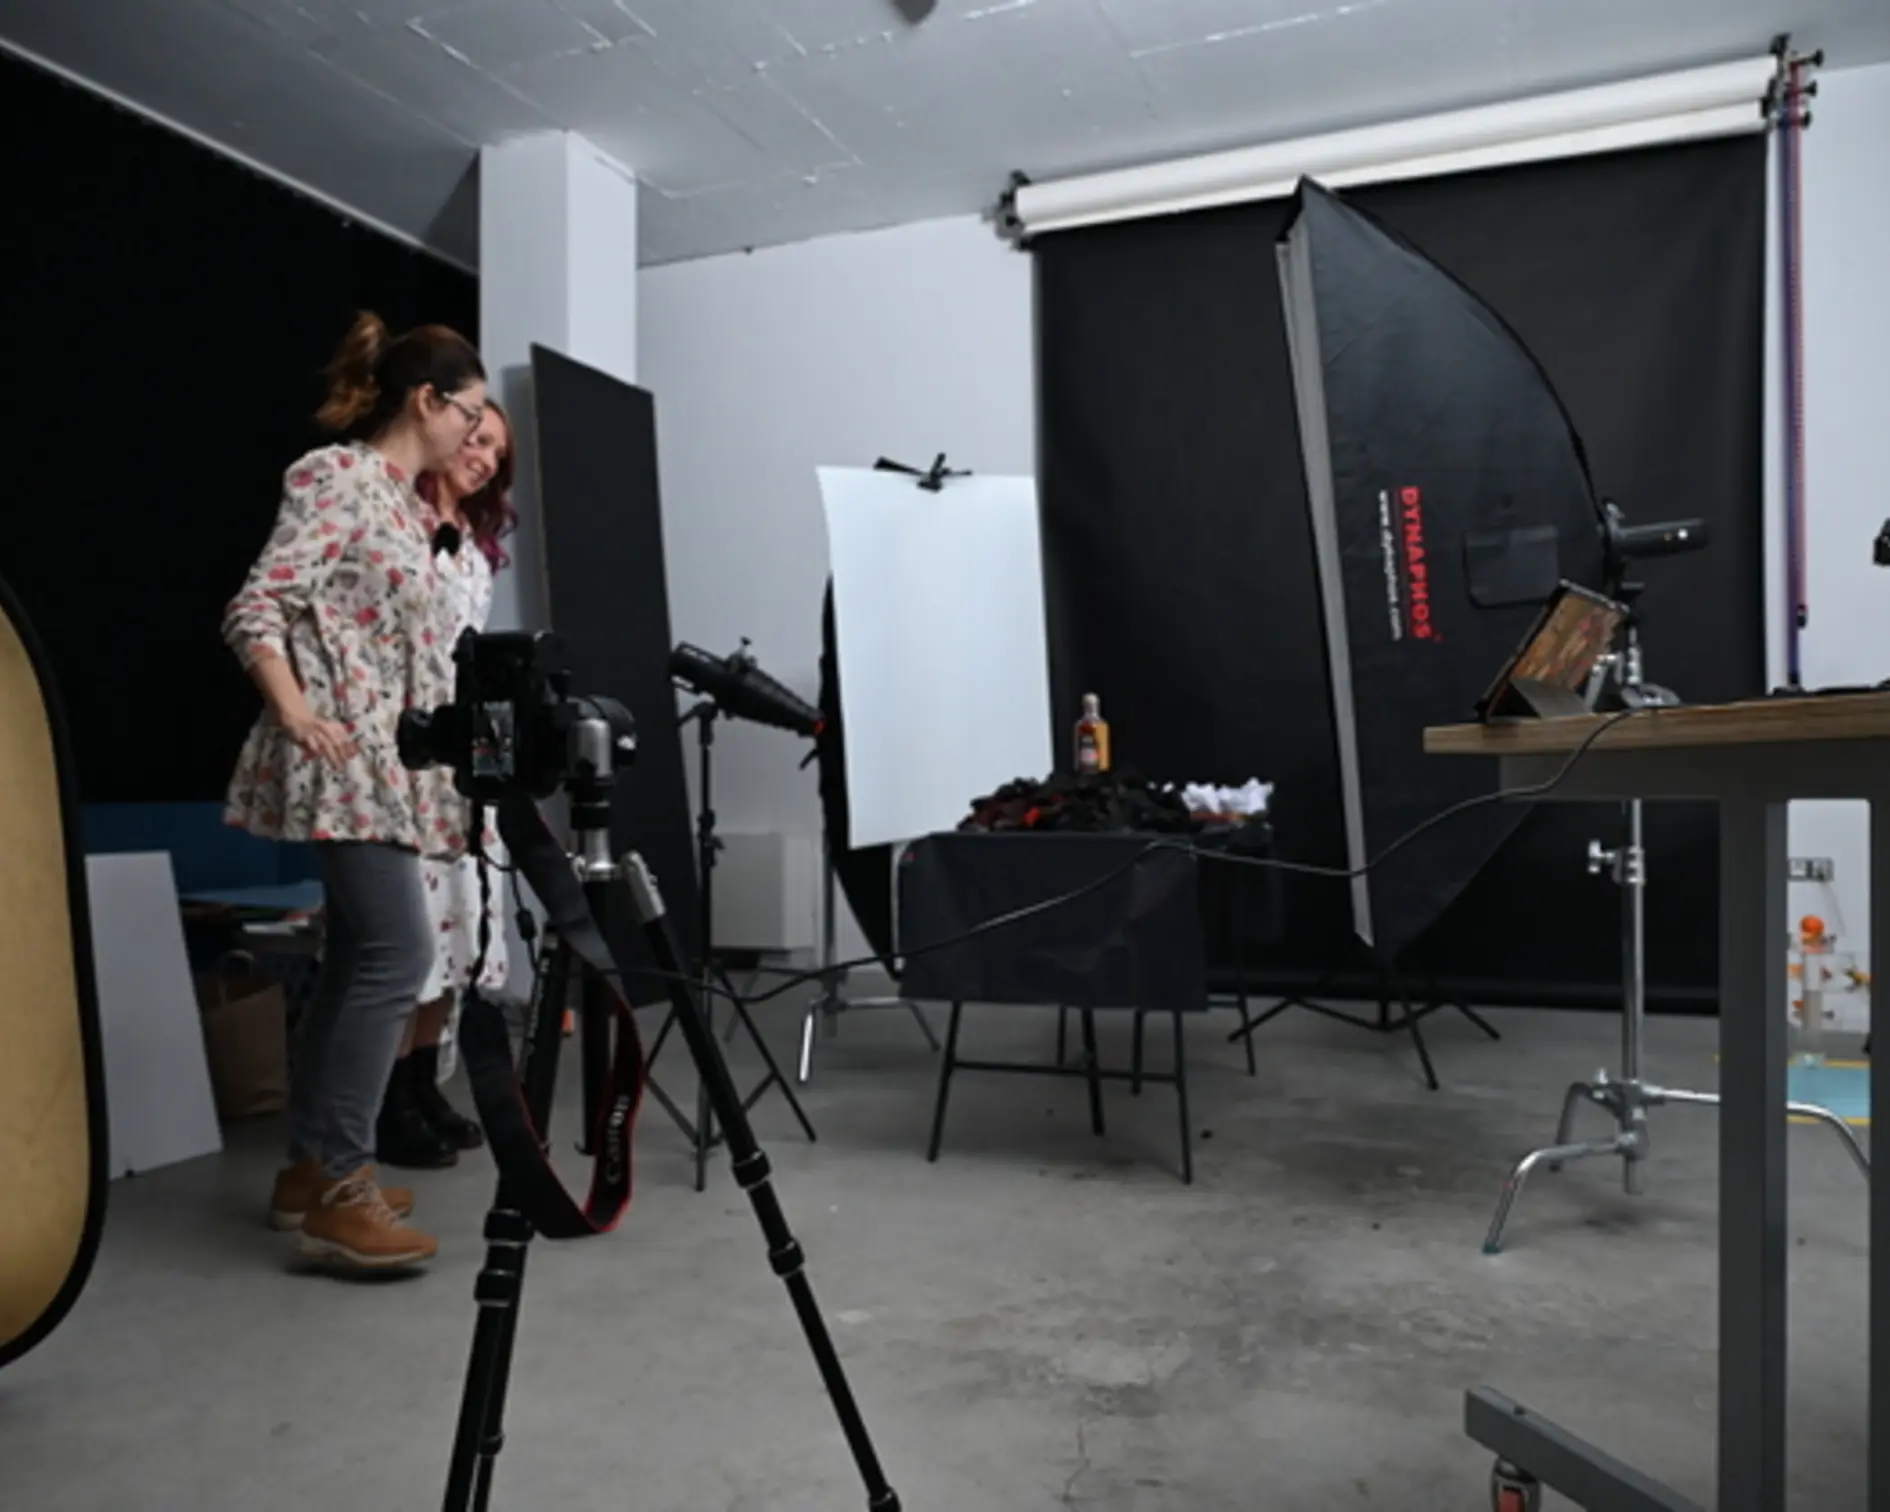 Dilyana Gergova and Olga Babitskaya in studio Dynaphos. Two women are standing in Dynaphos studios and discussing how to shoot the next composition. Расставлены стрипбоксы and on the table, there is a shooting object.